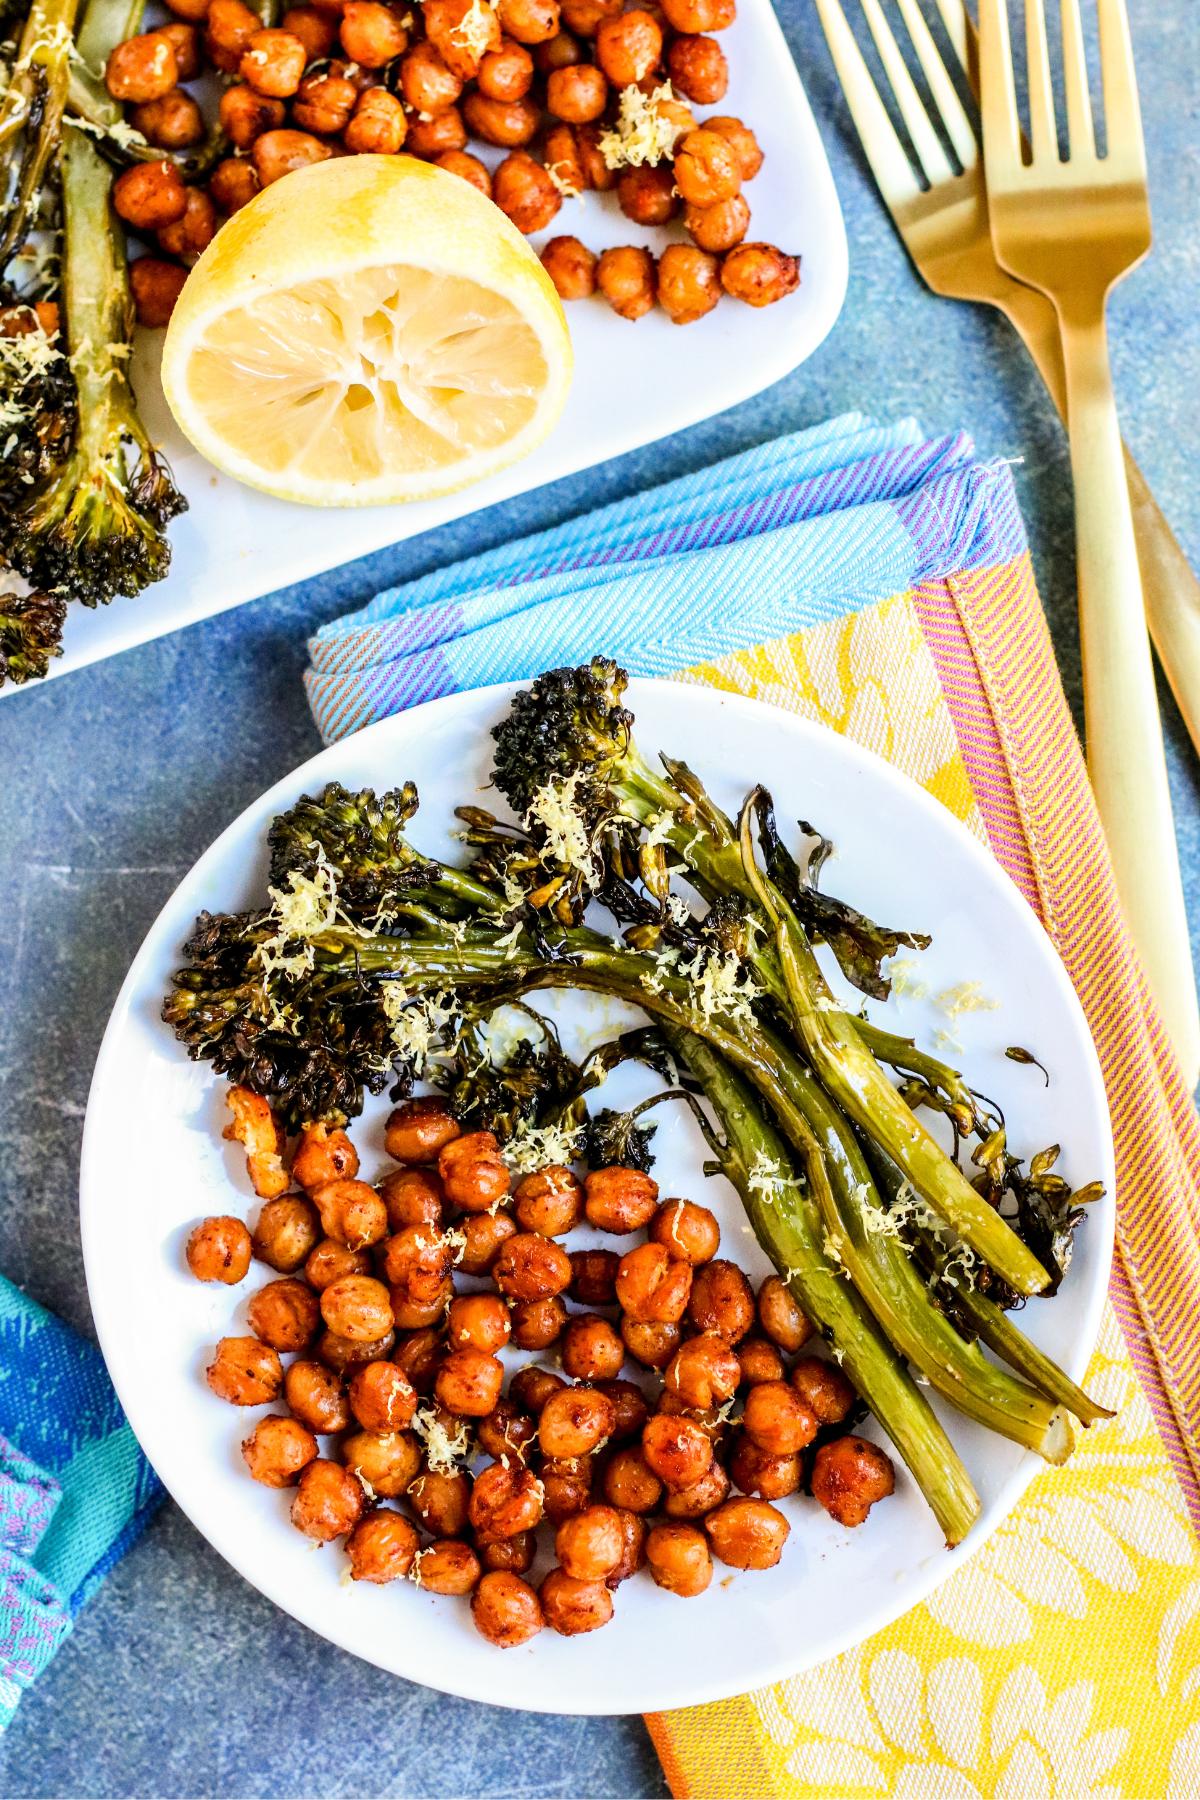 Plate with seasoned roasted chickpeas and broccolini garnished with lemon zest.